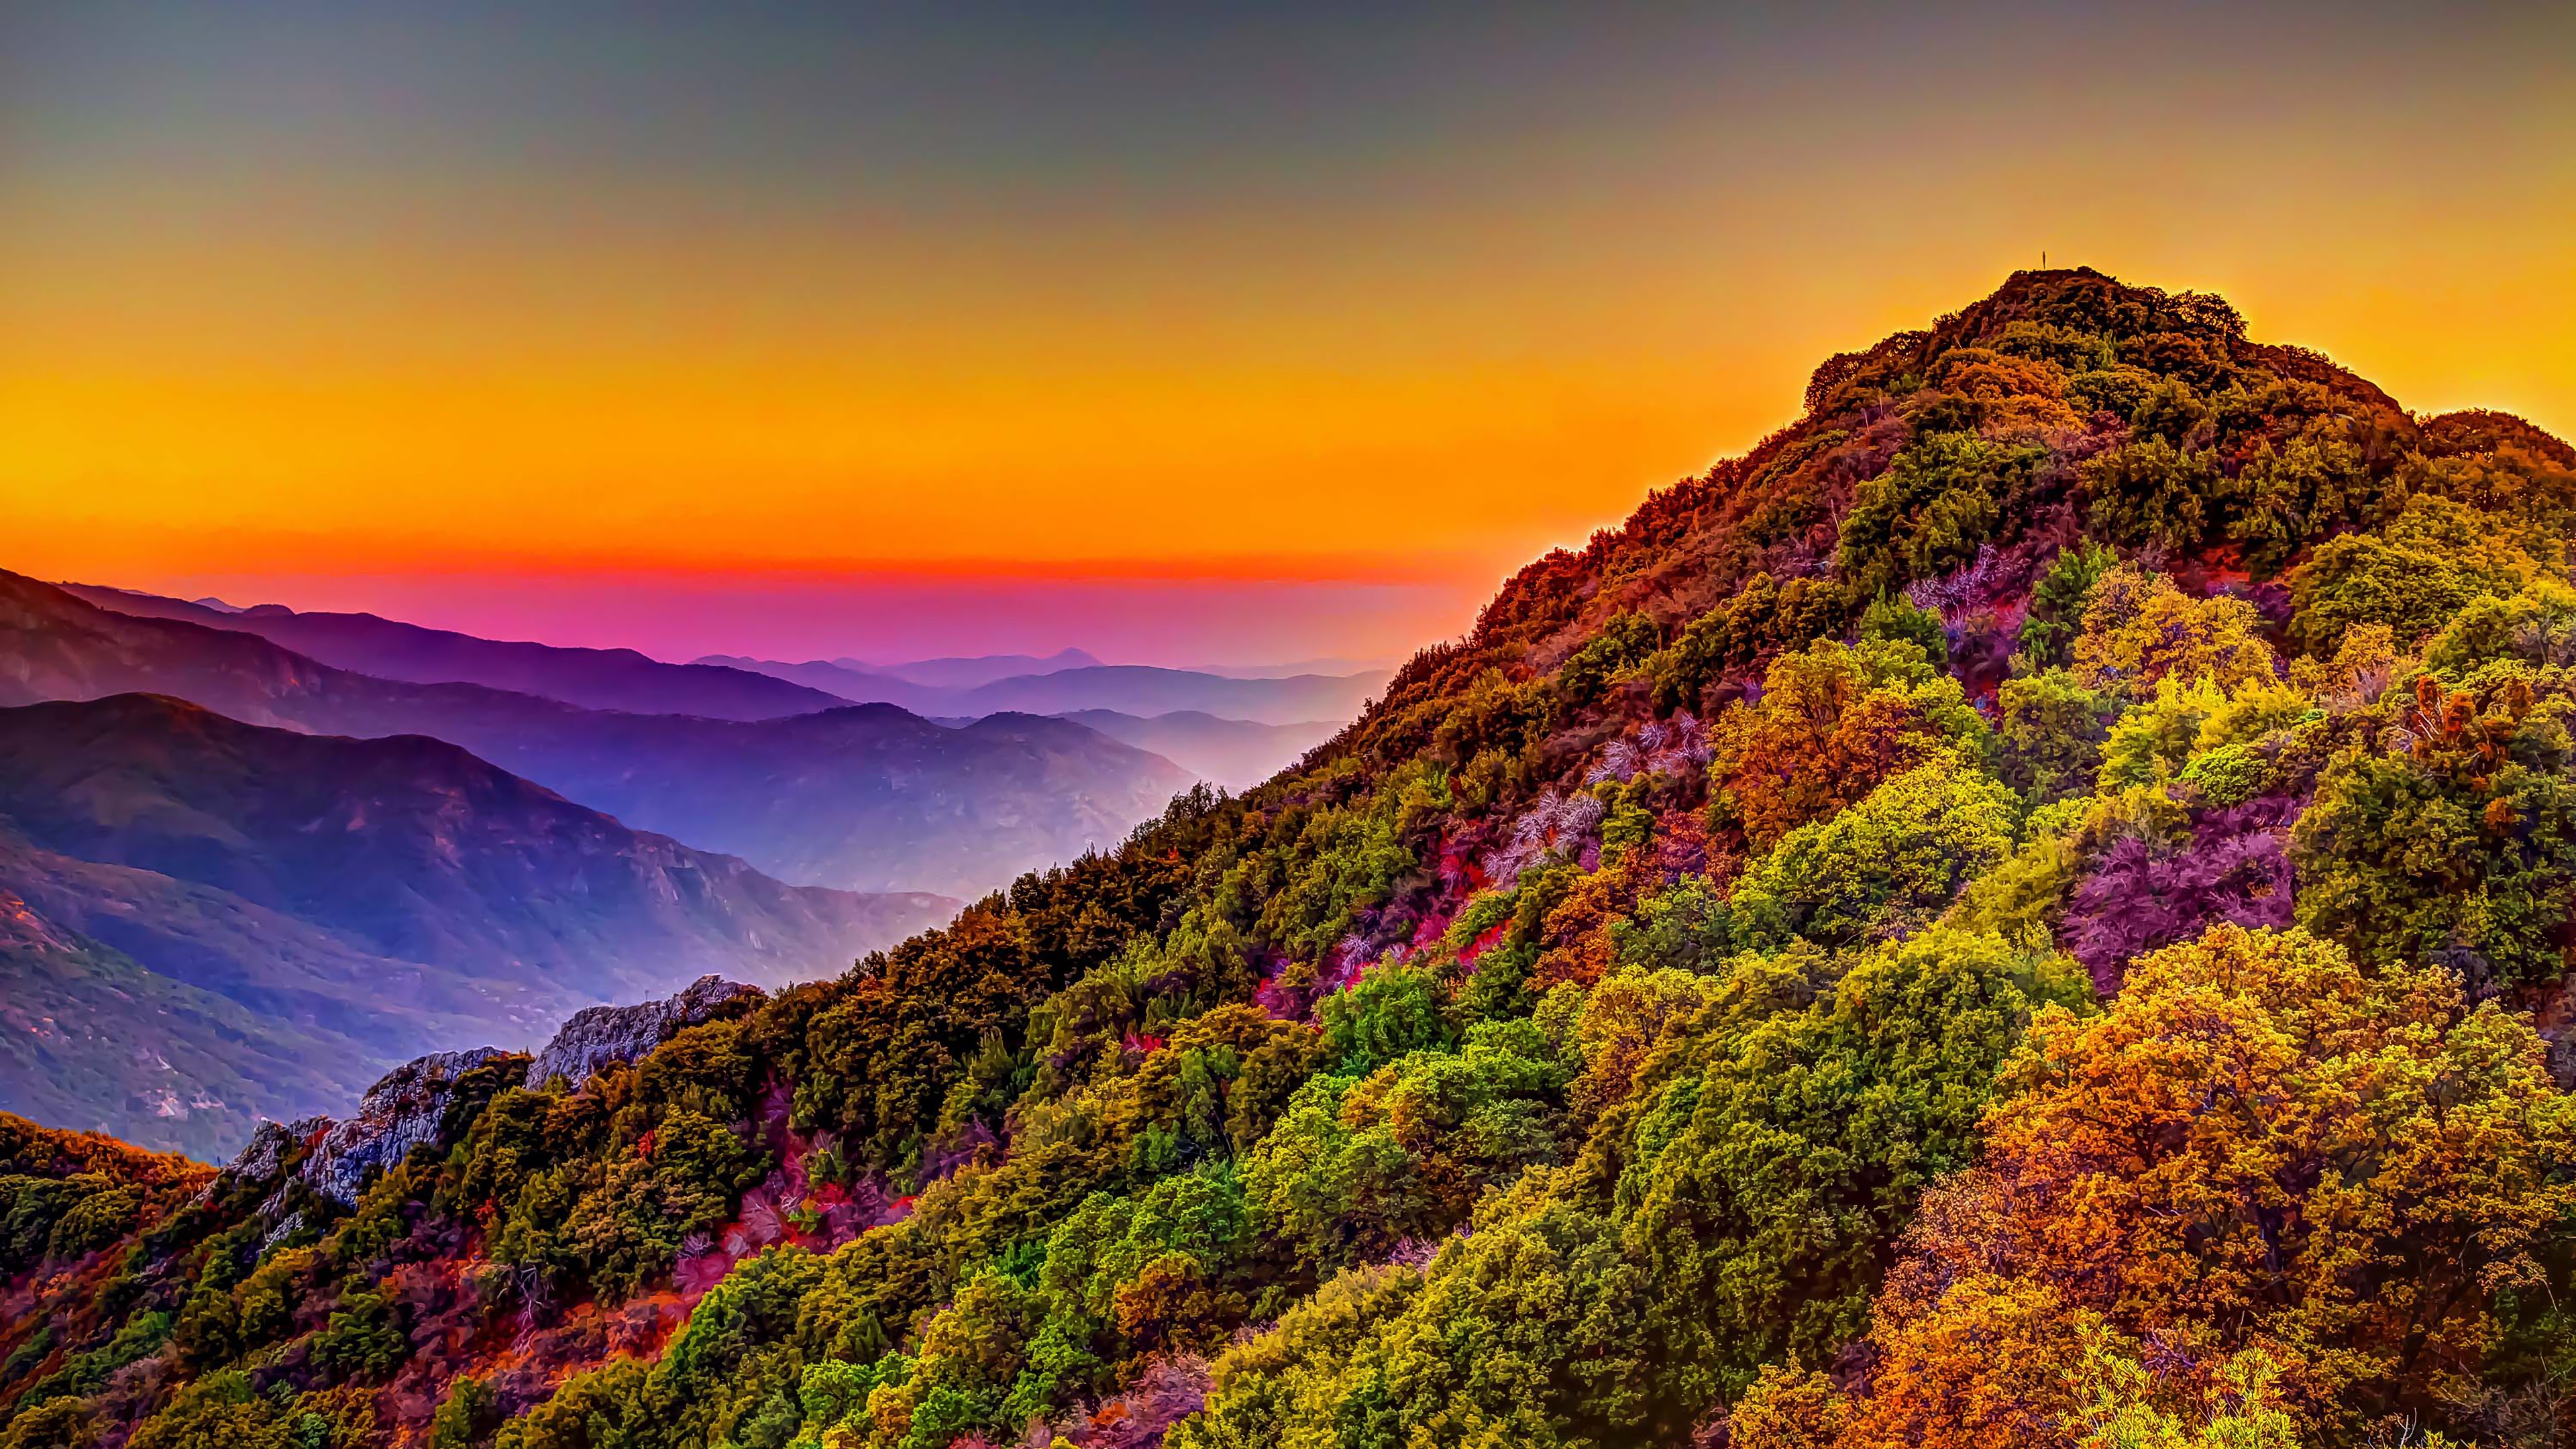 Mountain, Colorful, Forest, Nature, Sunset, Scenery, 4K, #161 Wallpaper